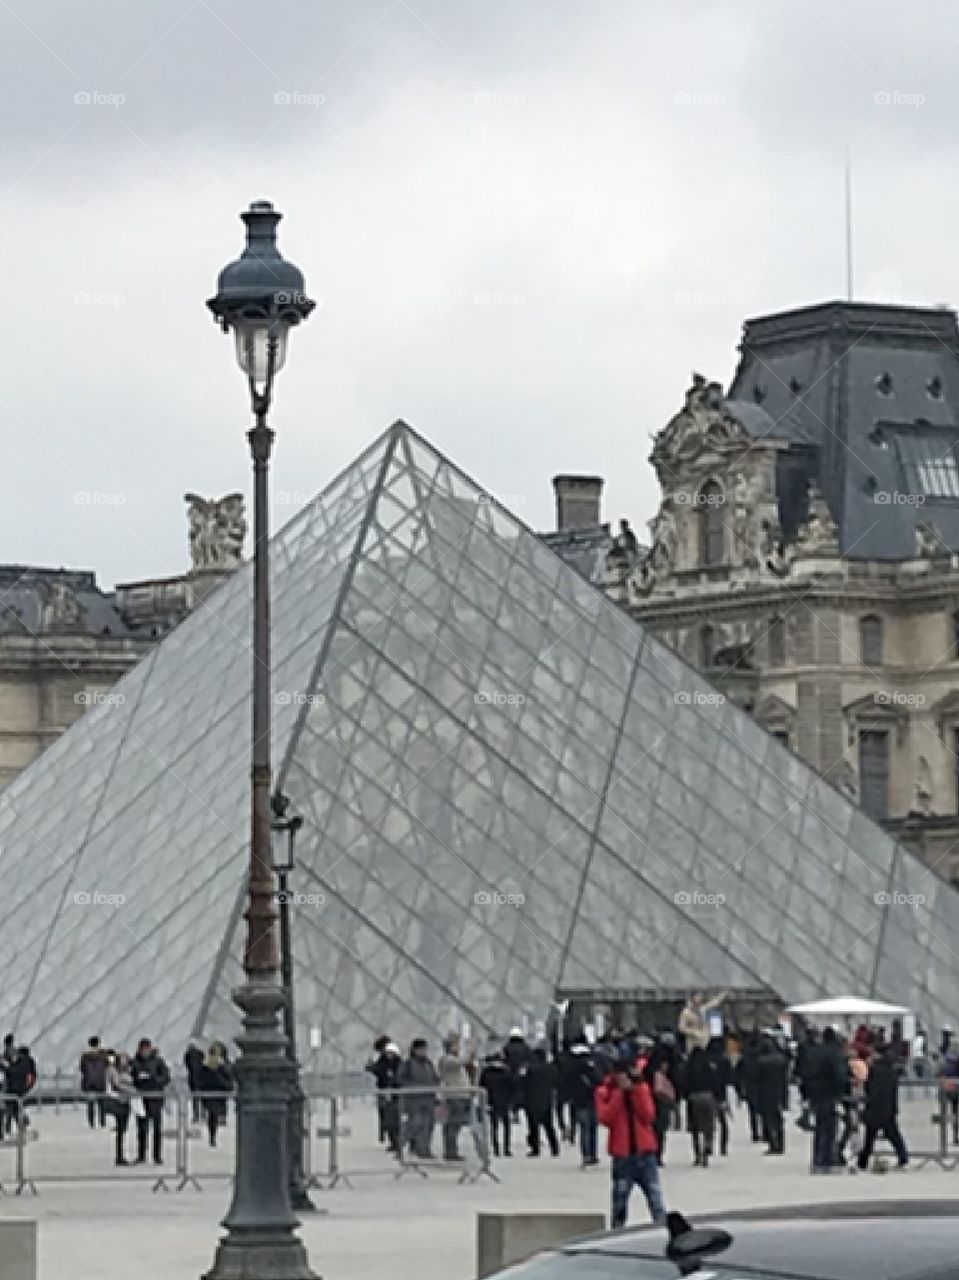 View of the pyramid at Louie museum in Paris France